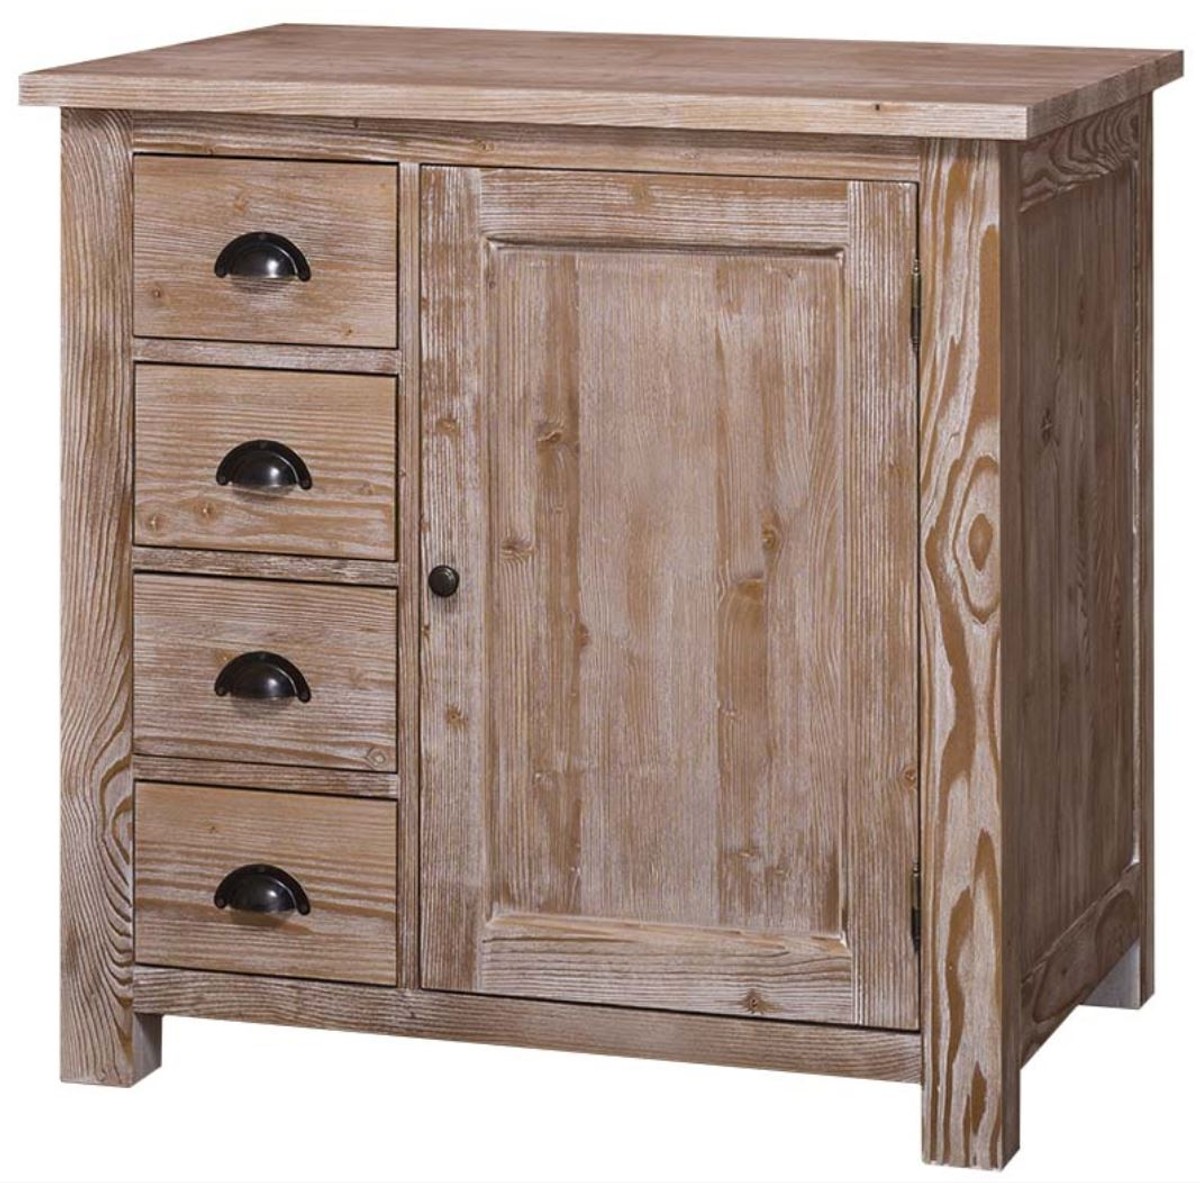 Casa Padrino Country Style Kitchen Cabinet Natural Colors 92 X 65